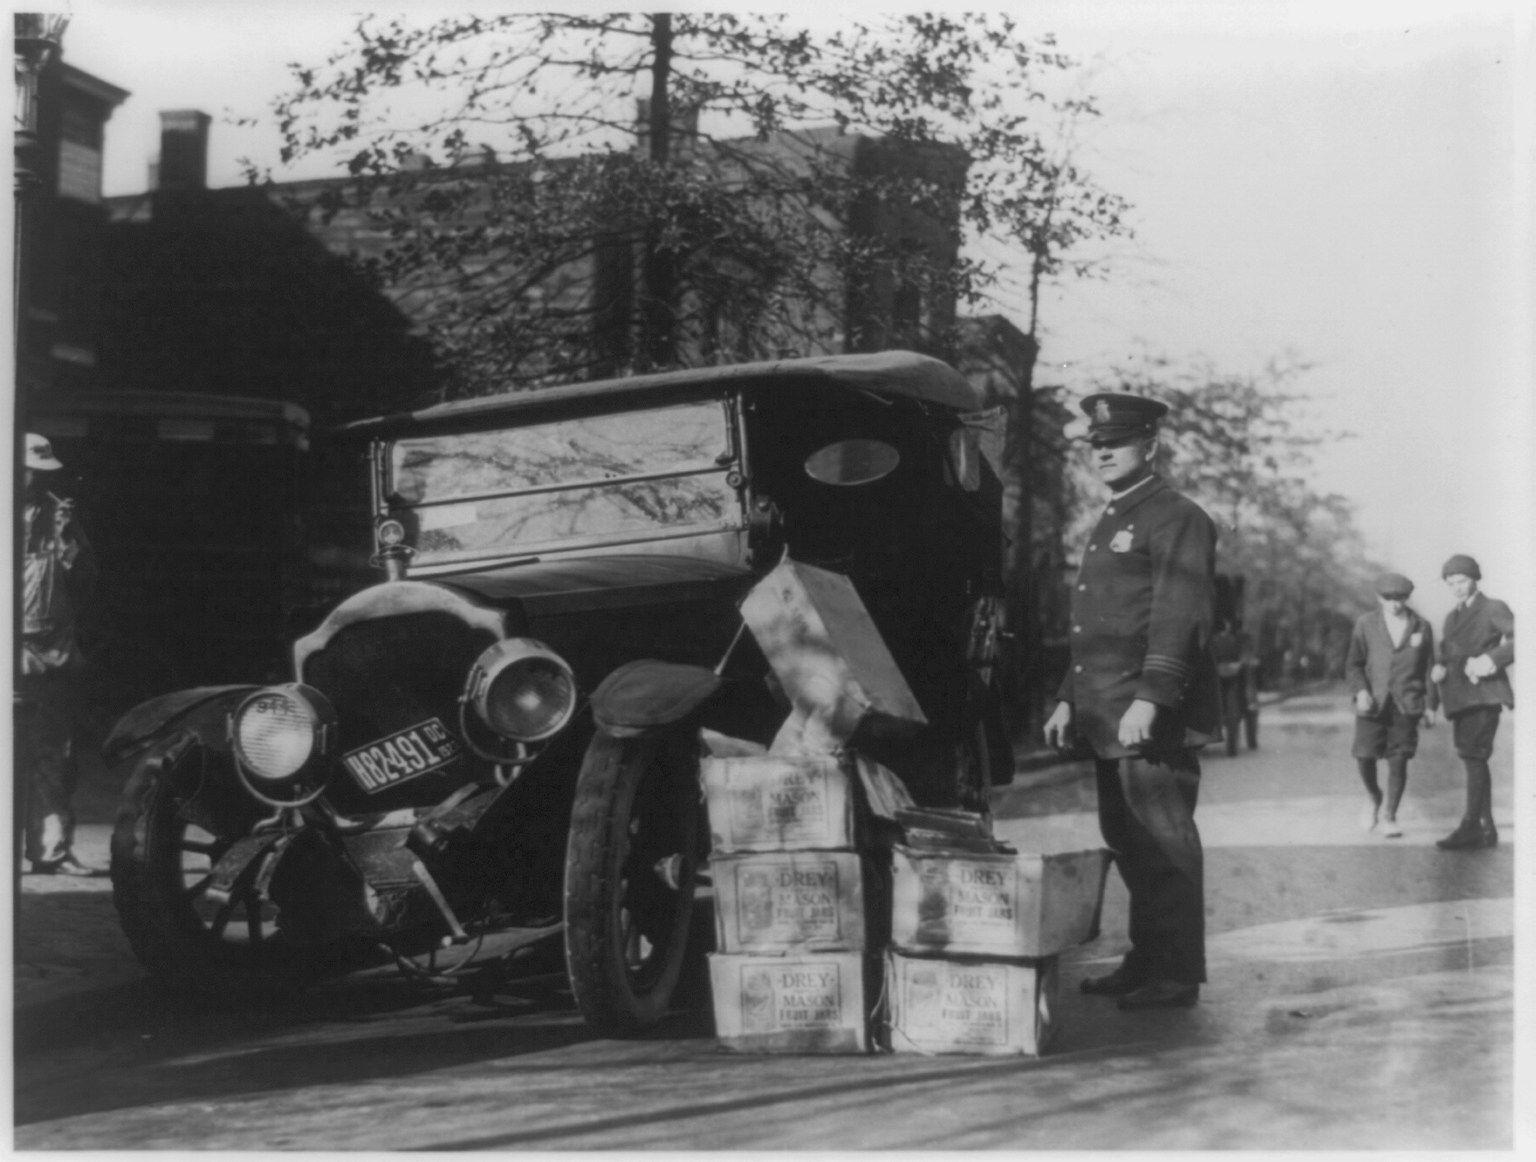 <p>Prohibition kept authorities on their toes as bootleggers ran liquor—often smuggled into the United States from <a href="https://prohibition.themobmuseum.org/the-history/the-rise-of-organized-crime/rum-running/">Europe, Canada, and the Caribbean</a>—to illegal speakeasies and people’s homes.</p>